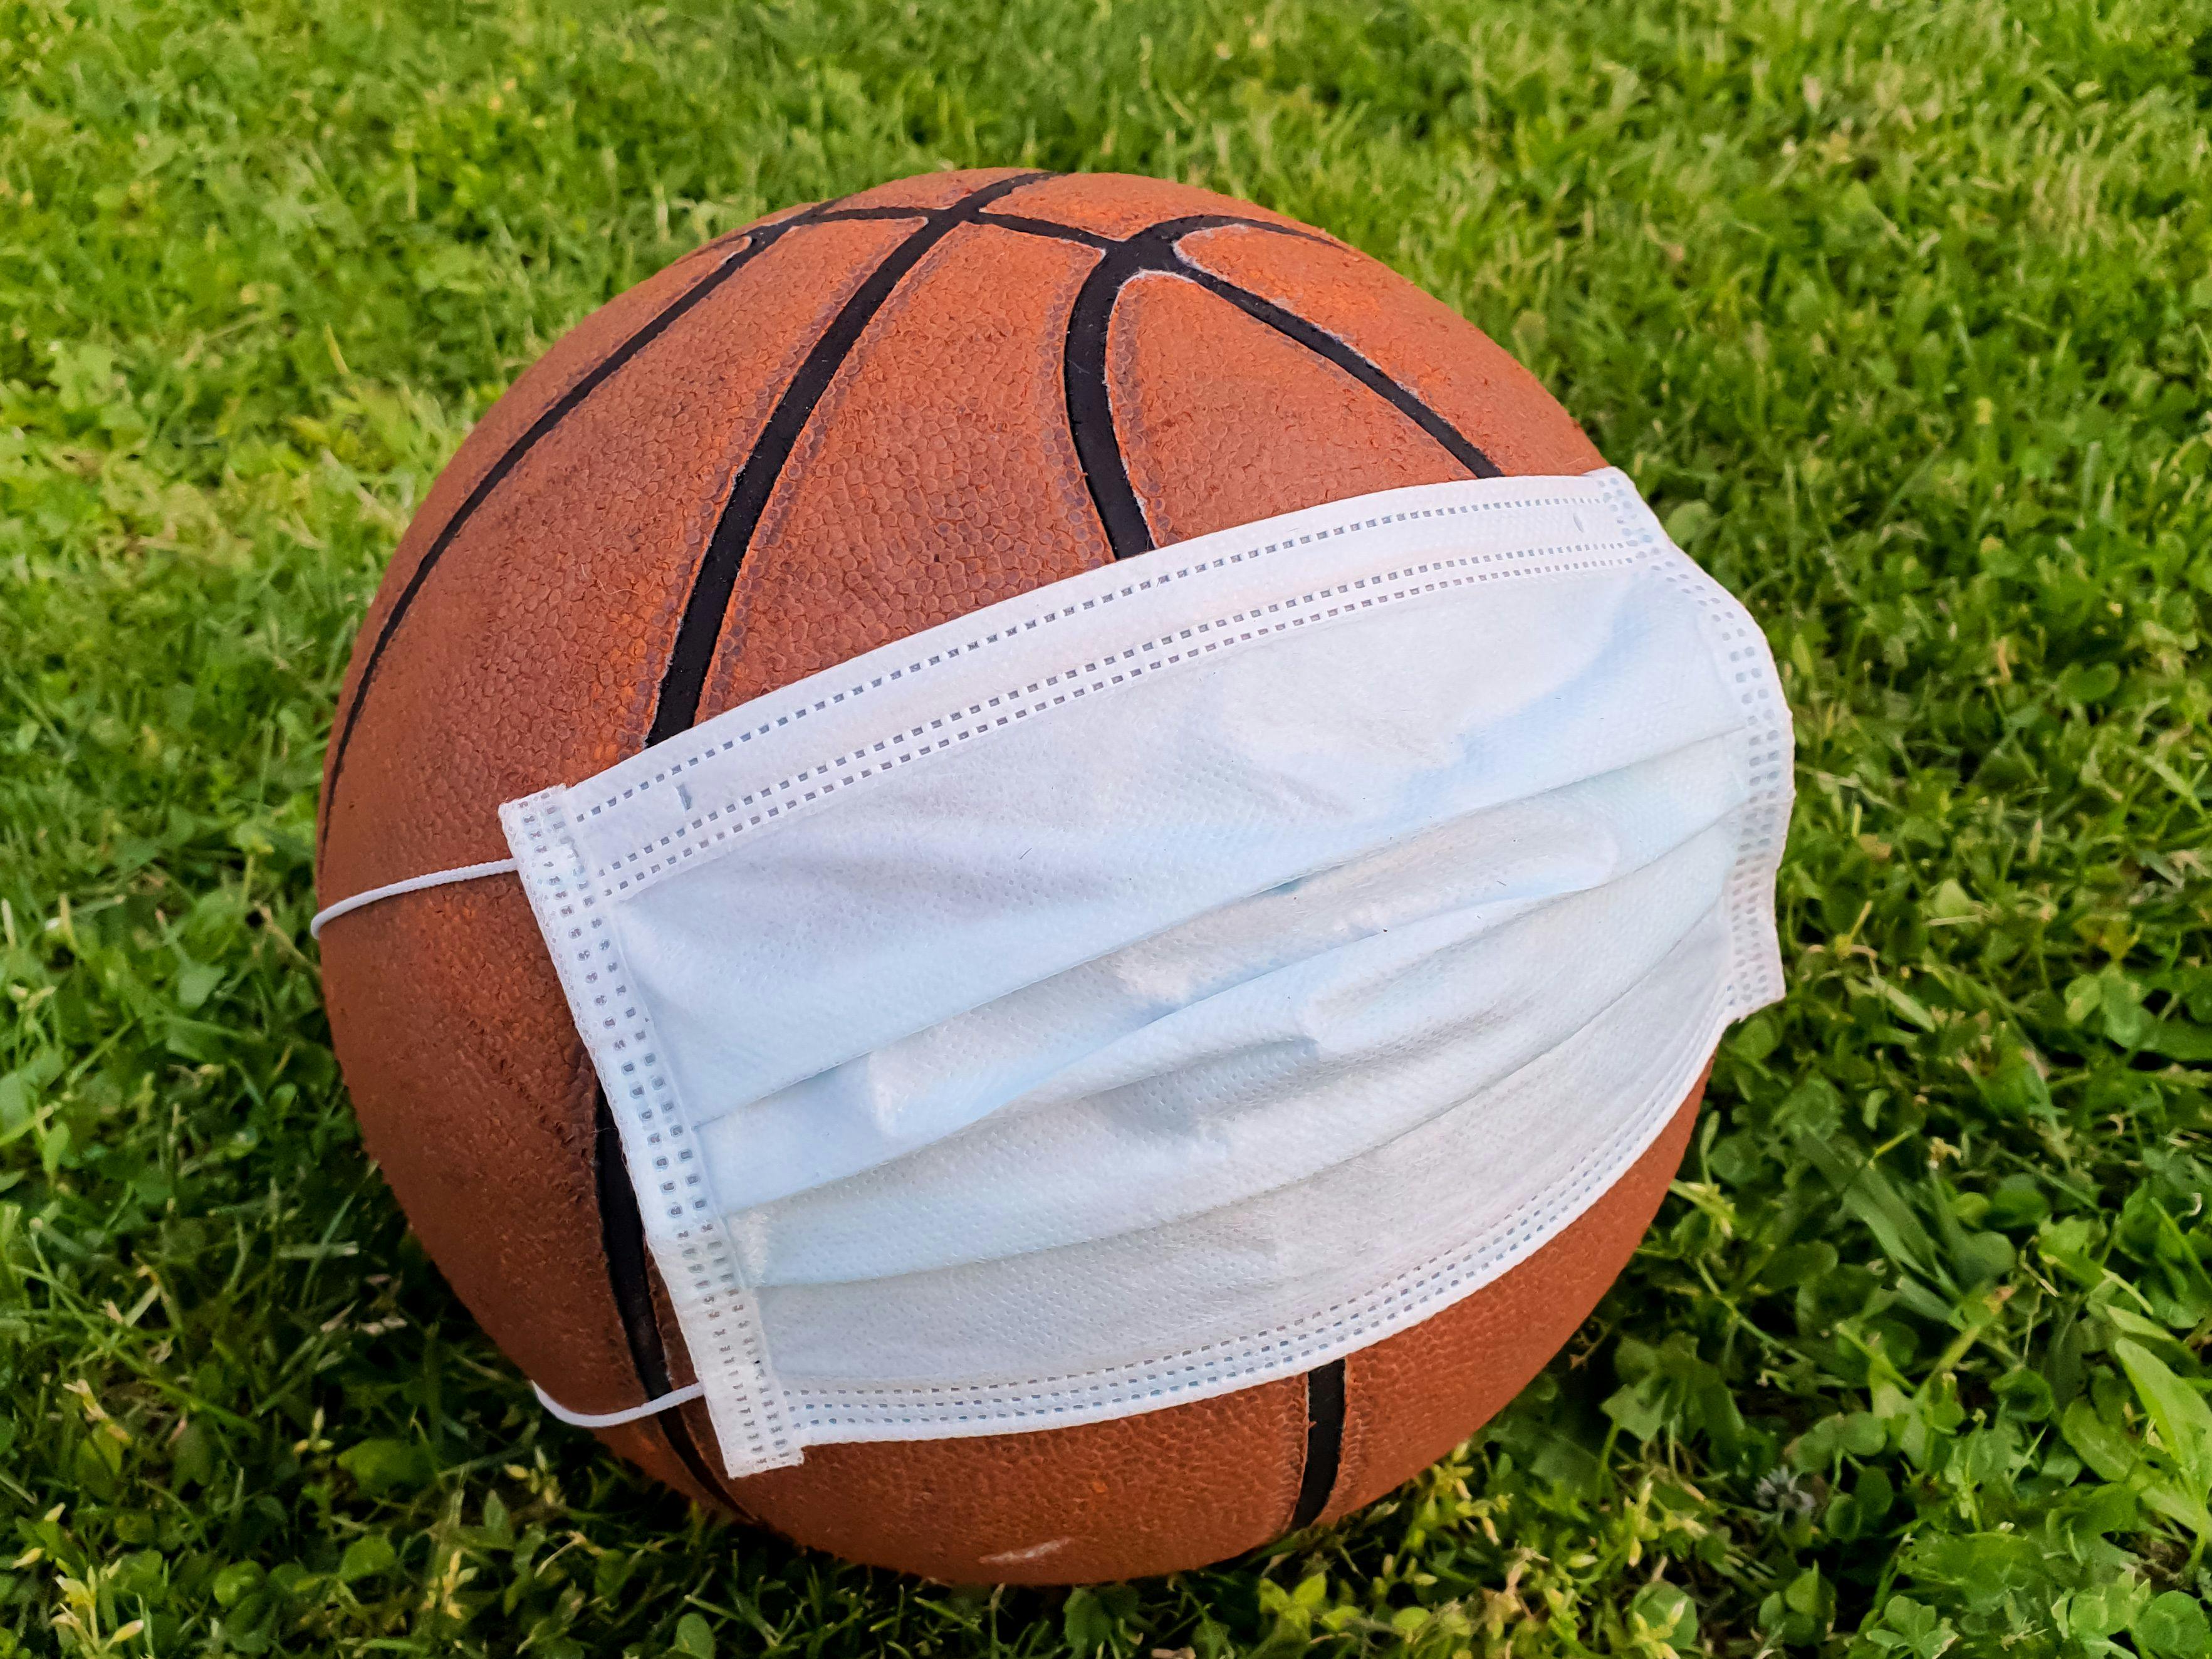 Receiving a booster vaccine significantly reduced Omicron infections among National Basketball Association (NBA) players and staff.